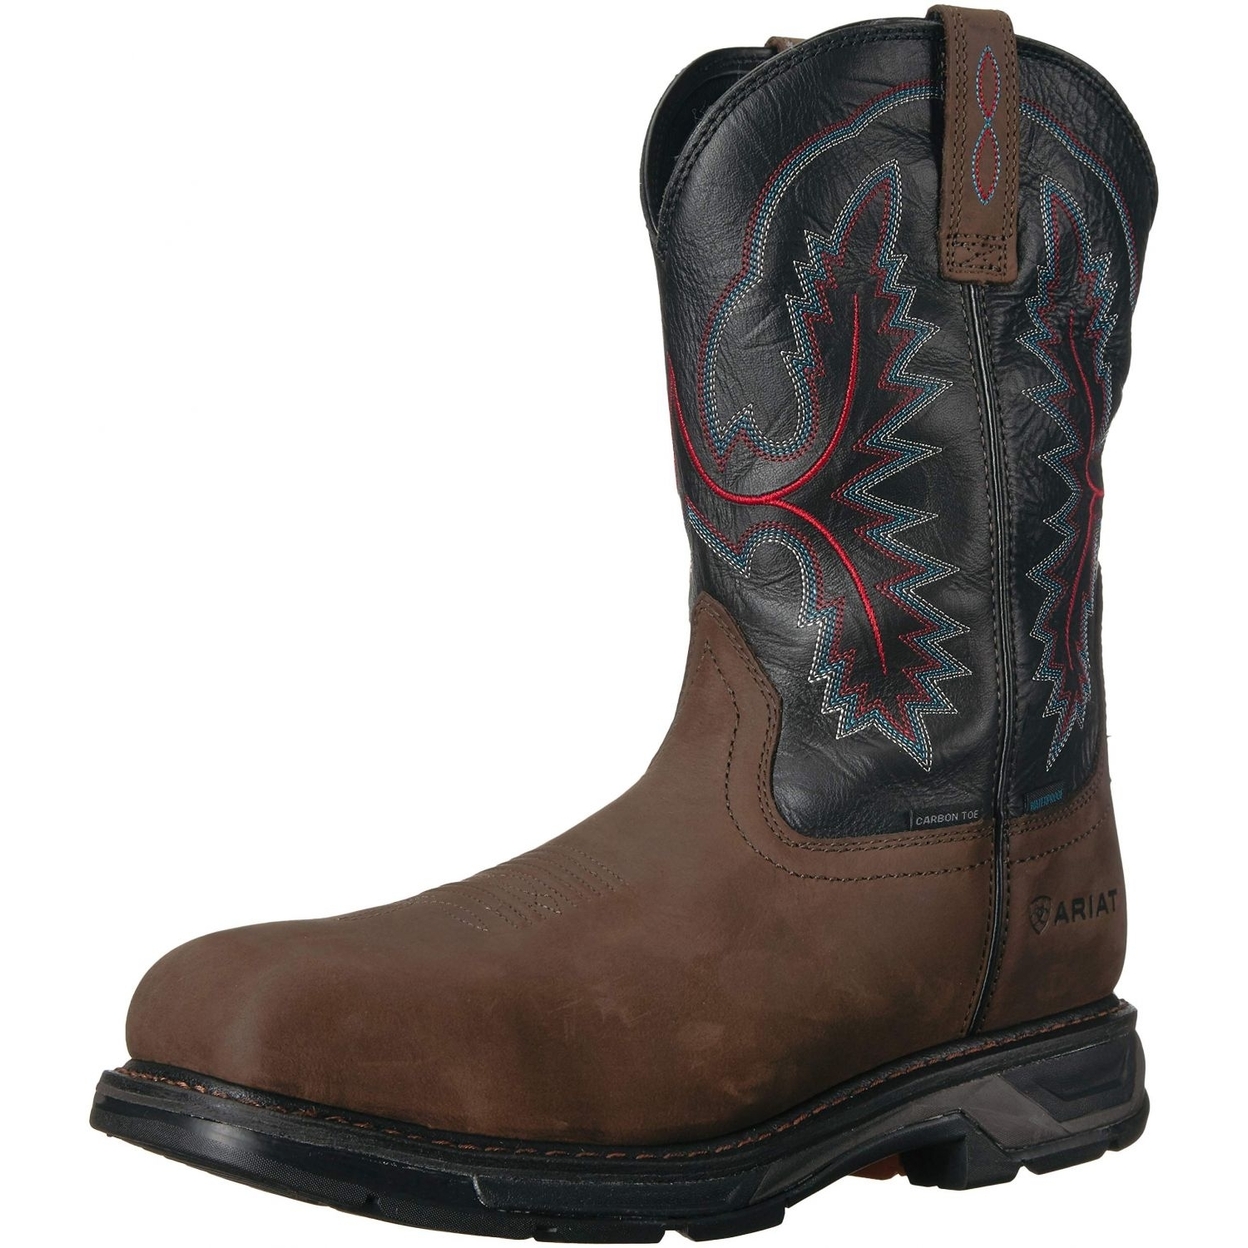 Ariat Work Men's Workhog XT H2O Carbon Toe Western Boot ONE SIZE BRK/ FOREST - BRK/ FOREST, 14-D